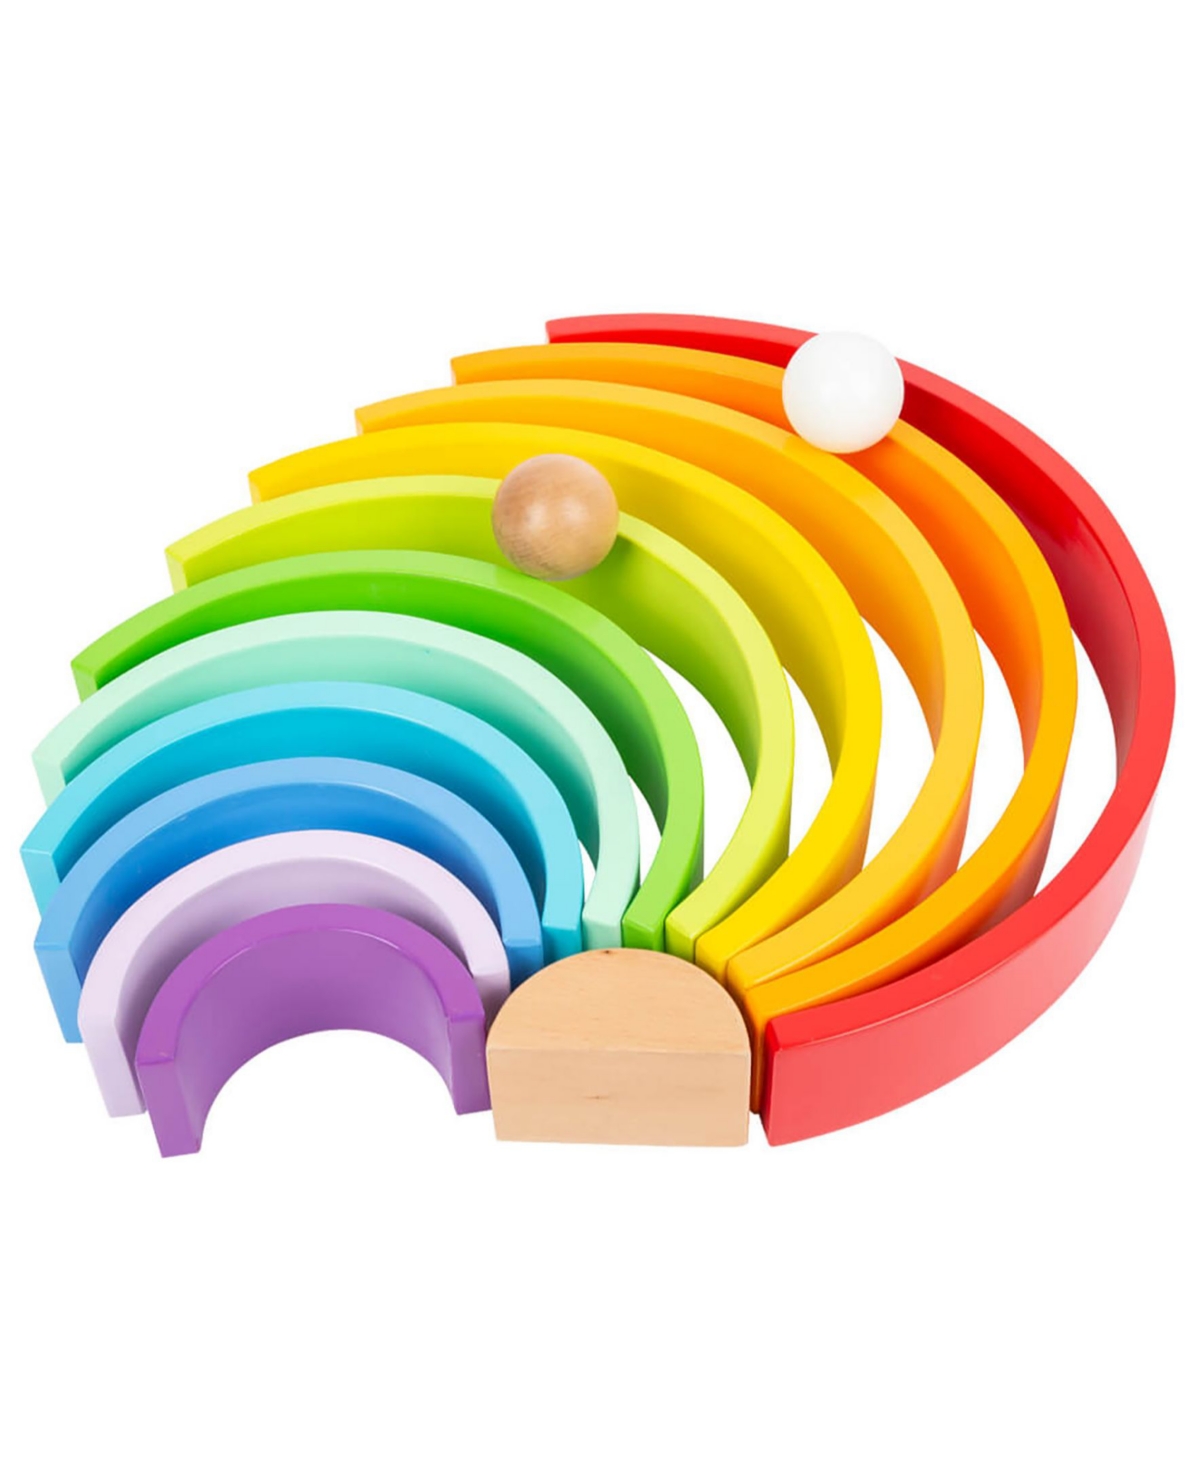 Shop Flat River Group Small Foot Wooden Toys Xl Wooden Rainbow Play Set, 9 Piece In Multi